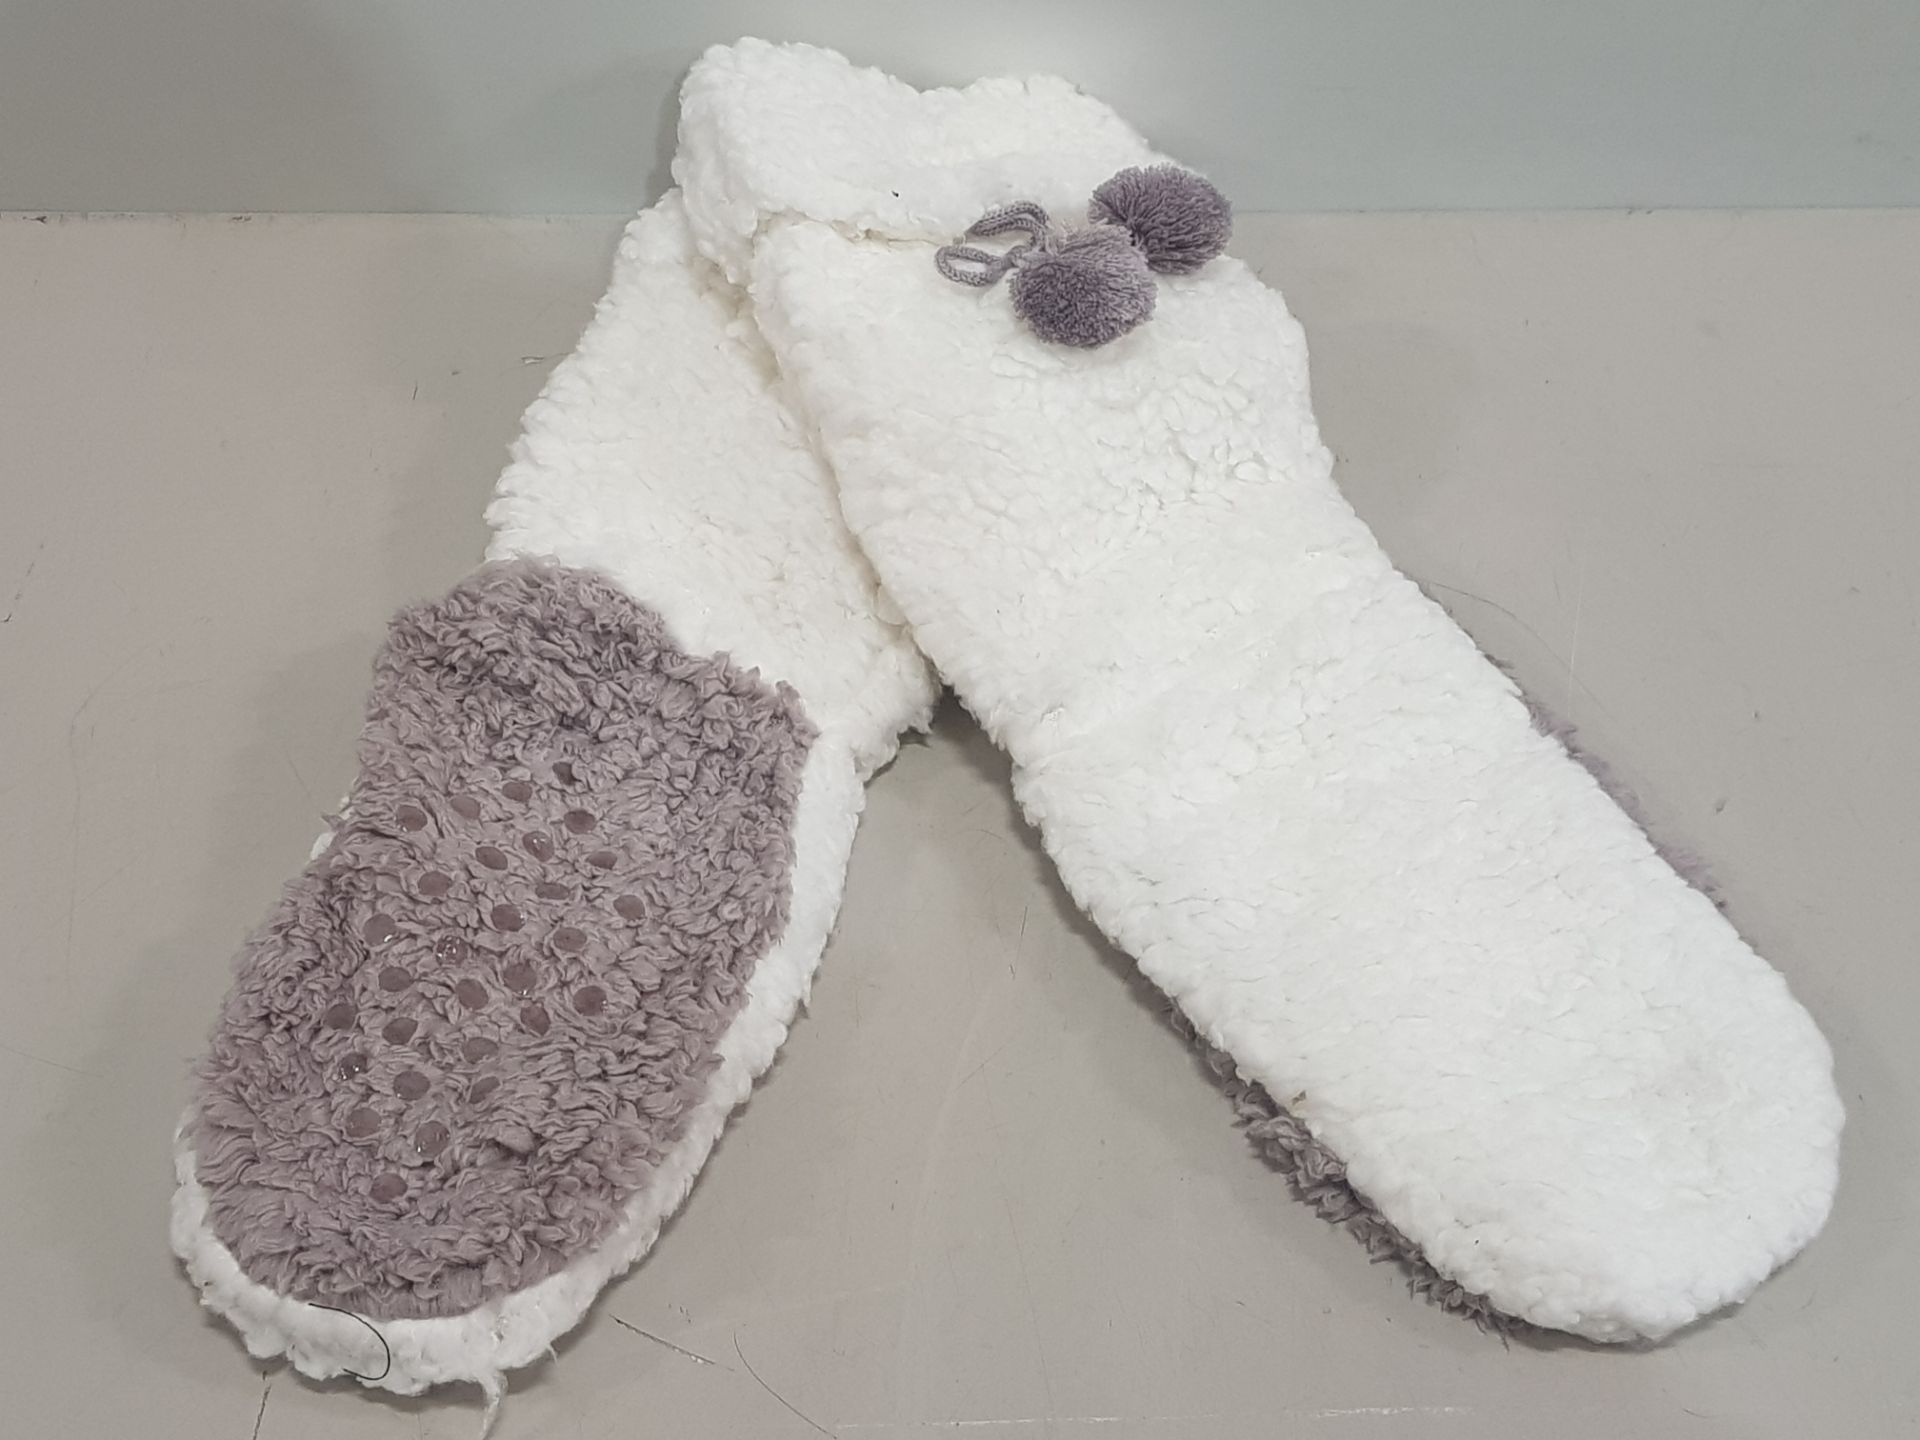 30 X BRAND NEW LOUNGEABLE BOUTIQUE LONG WOOLY SOCKS IN WHITE AND BROWN WITH GRIP SOLES - ALL IN SIZE